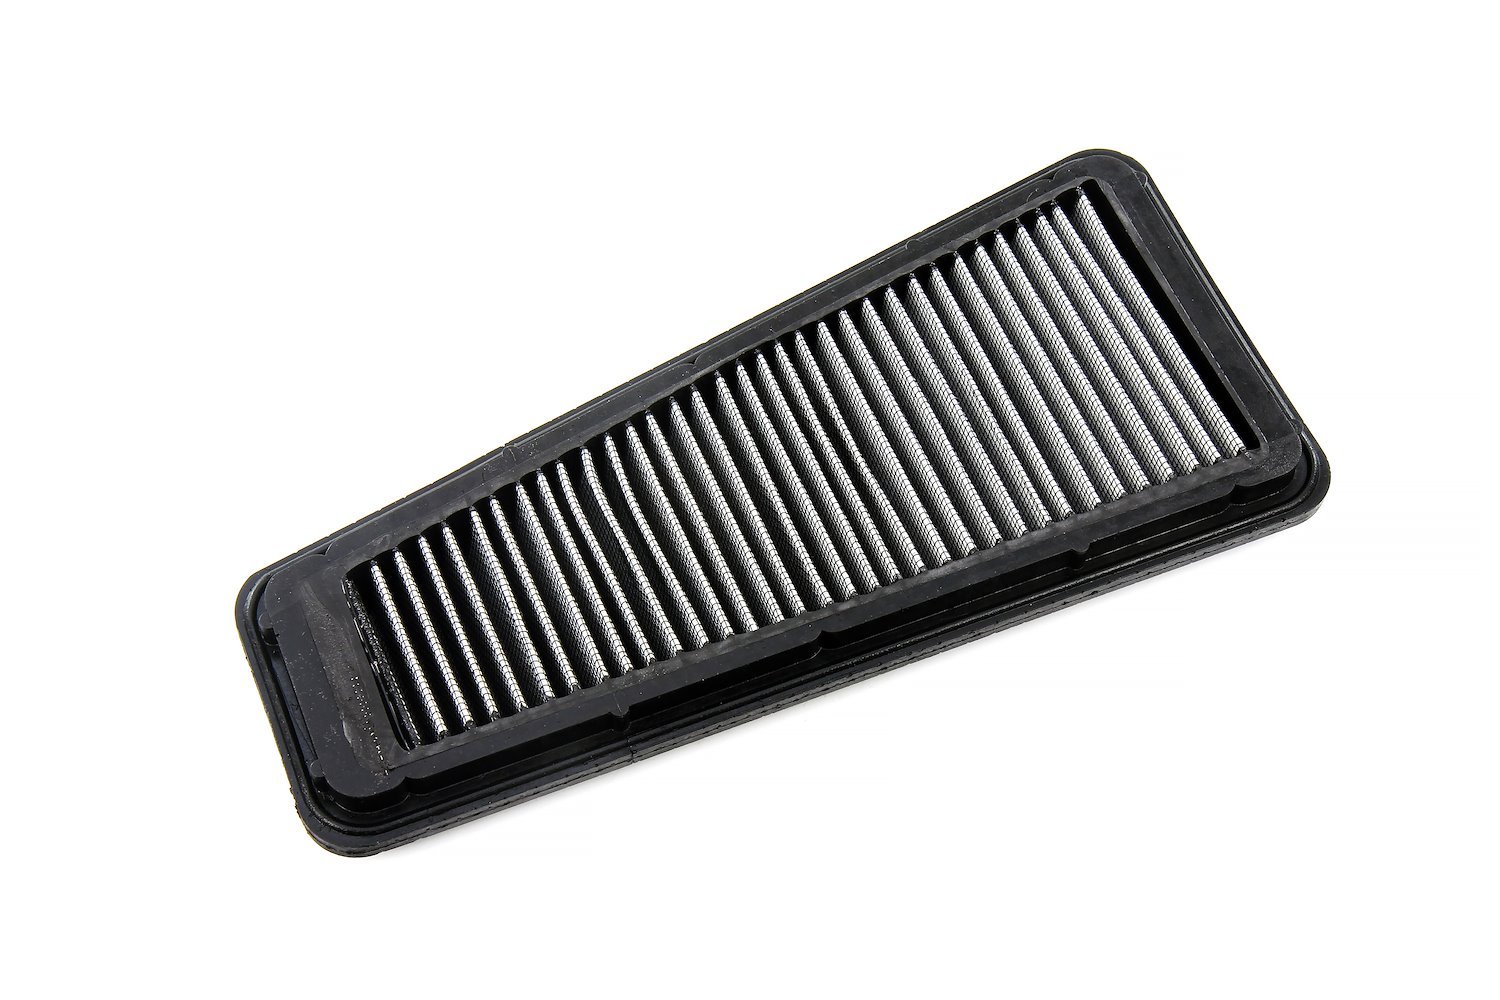 HPS-452365 Performance Drop-In Air Filter, Directly Replaces OEM Drop-In Panel Filter, Improves Performance & Fuel Economy